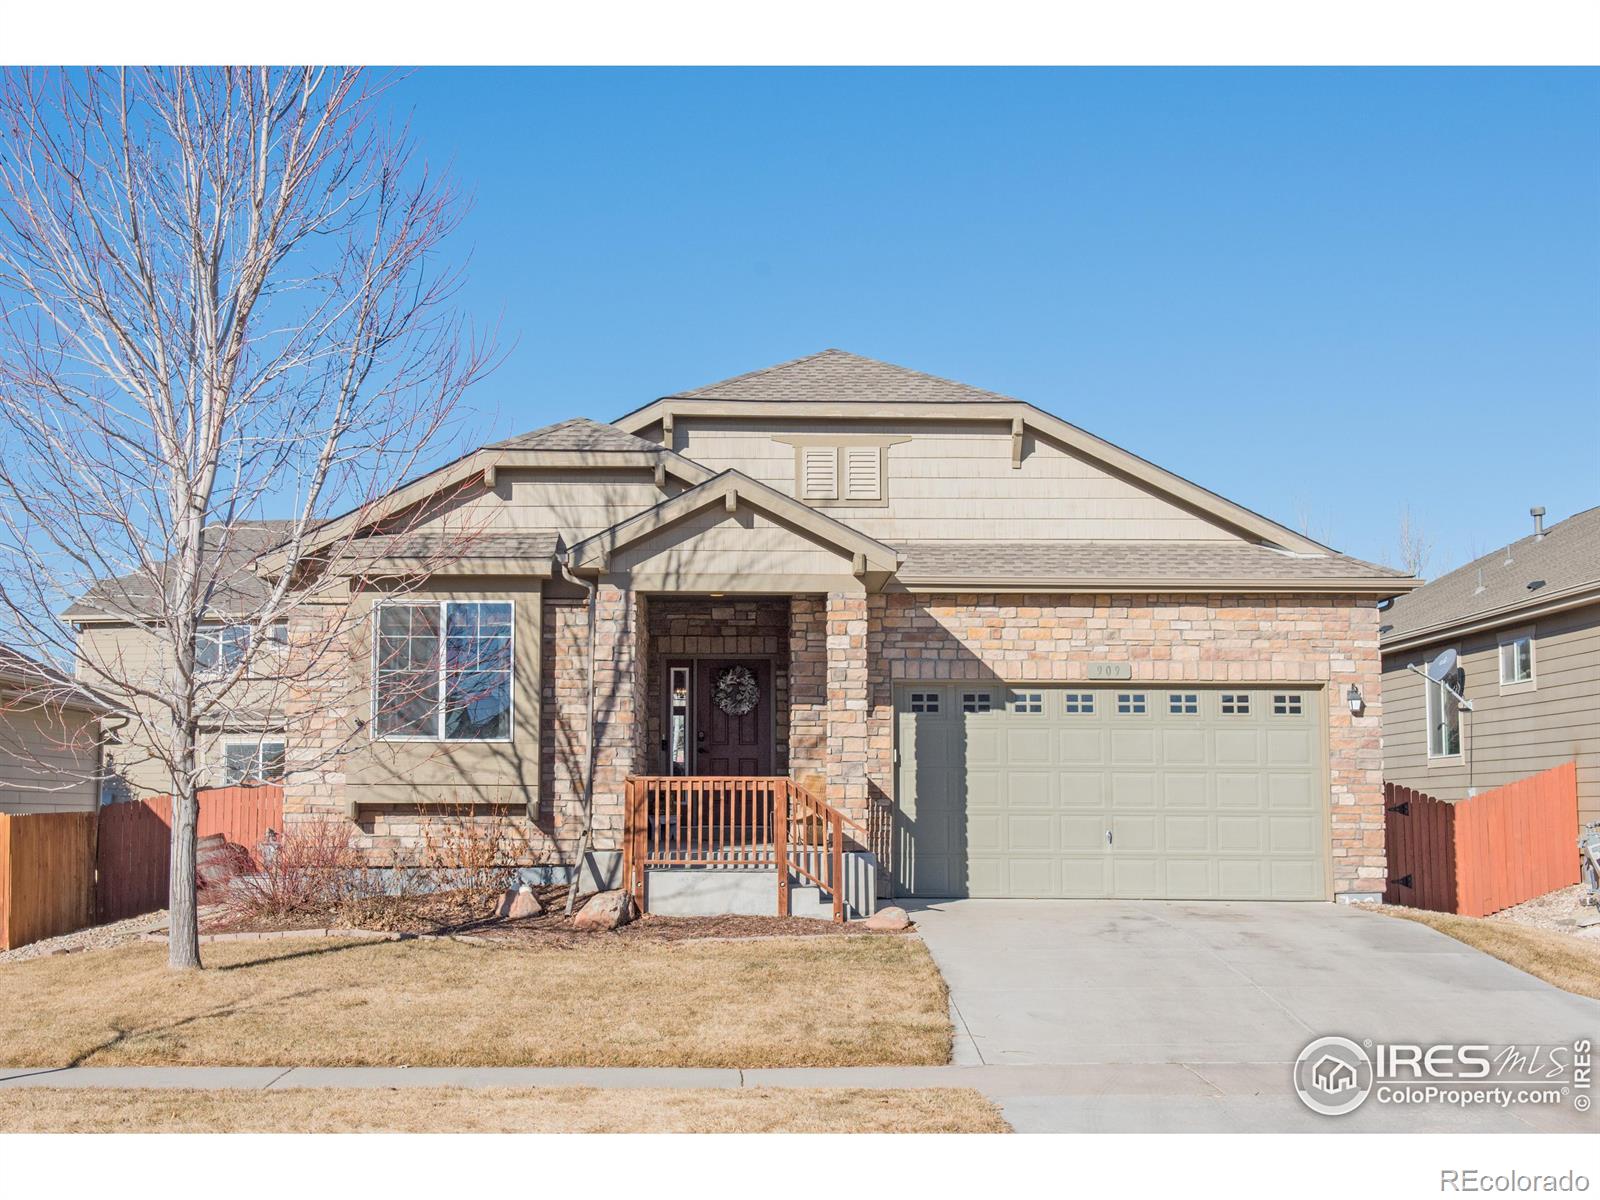 909  Trading Post Road, fort collins MLS: 4567891002409 Beds: 3 Baths: 4 Price: $539,900